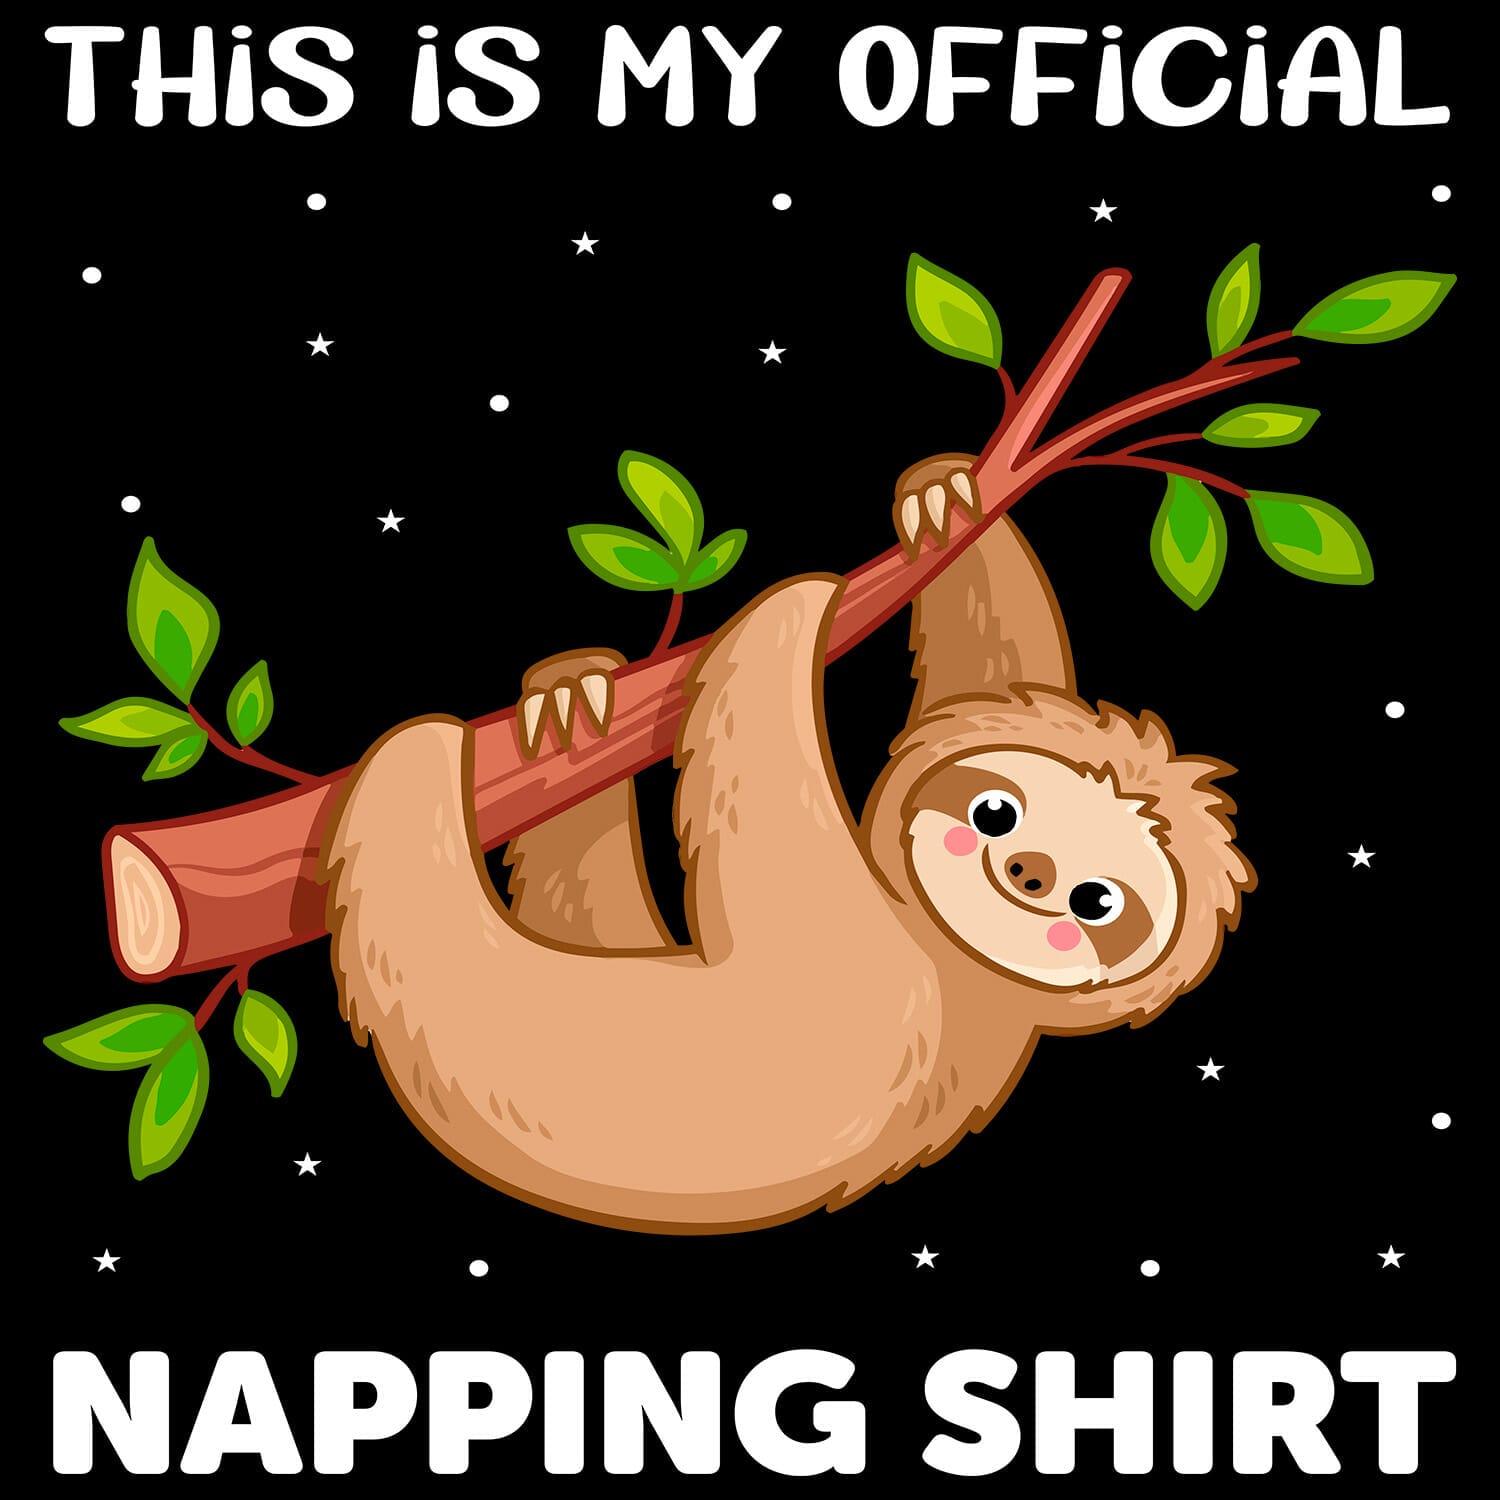 This is my official napping shirt - funny sloth tshirt design